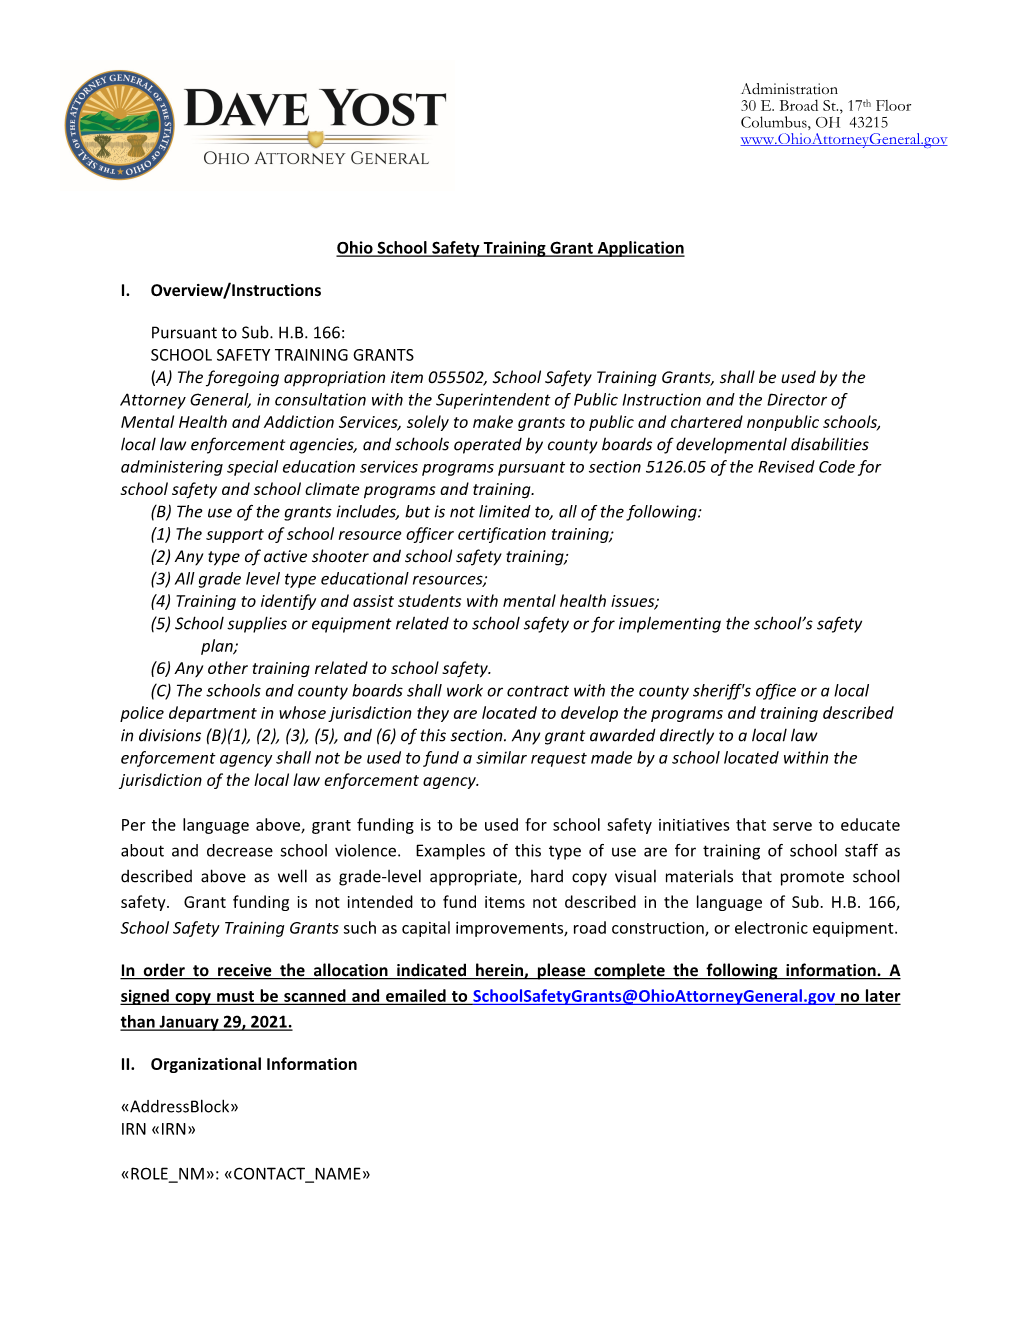 Ohio School Safety Training Grant Application I. Overview/Instructions Pursuant to Sub. HB